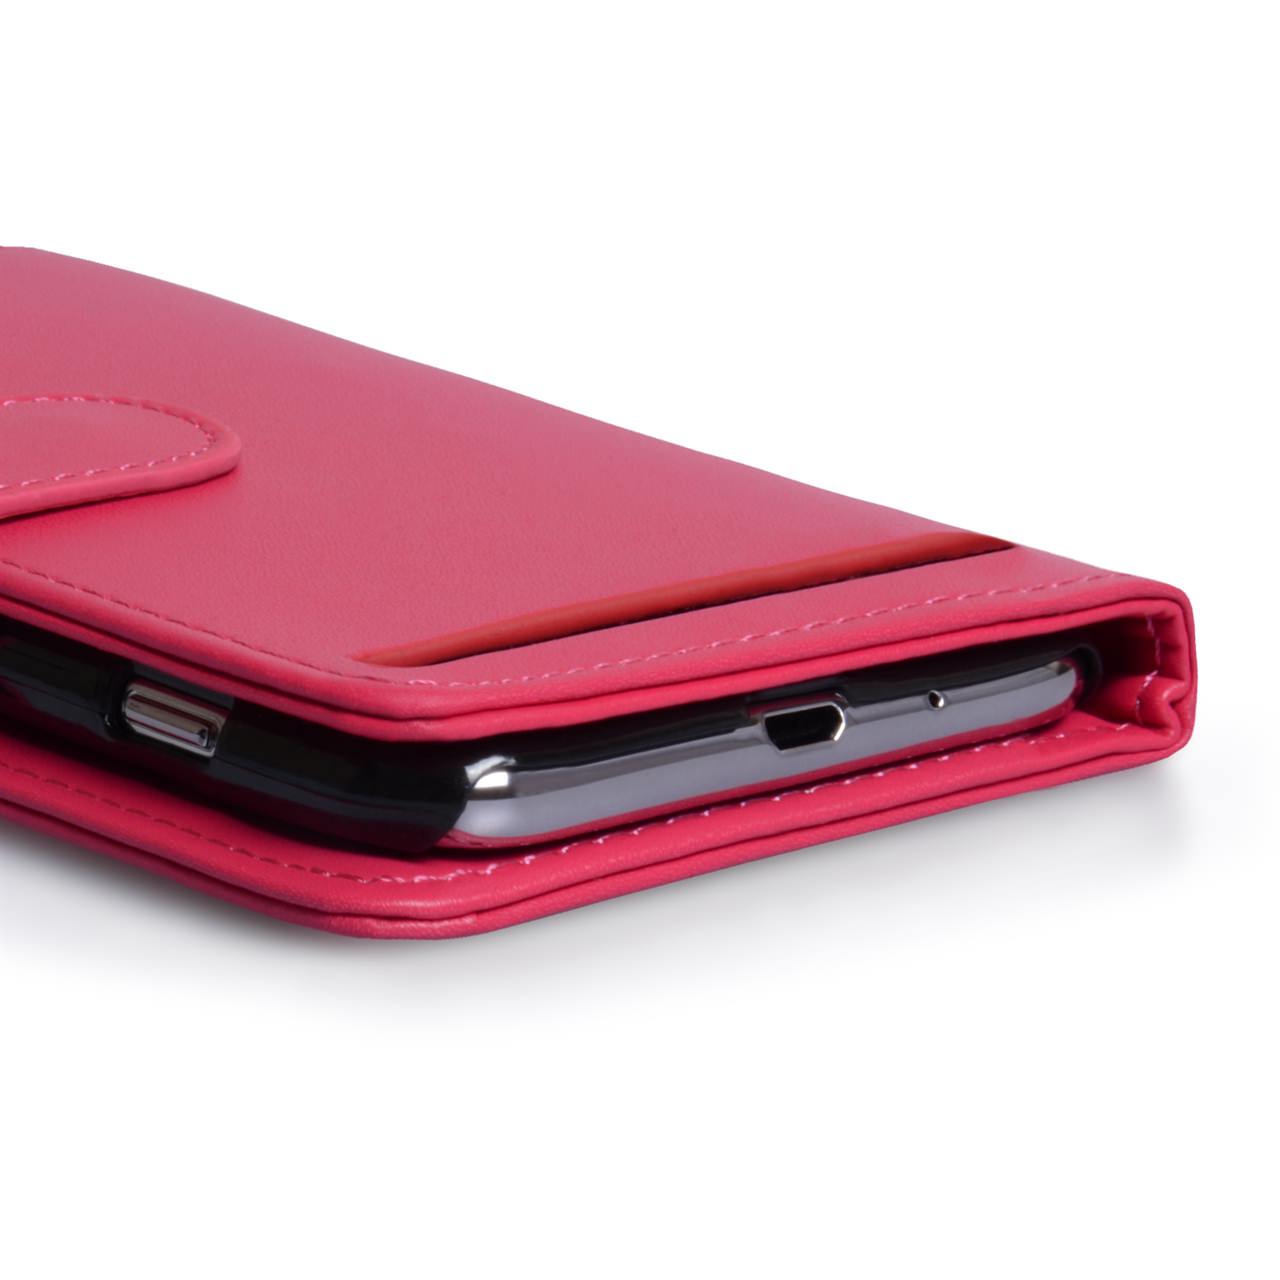 Hot Pink Samsung Ativ S PU Leather Wallet Case| Mobile